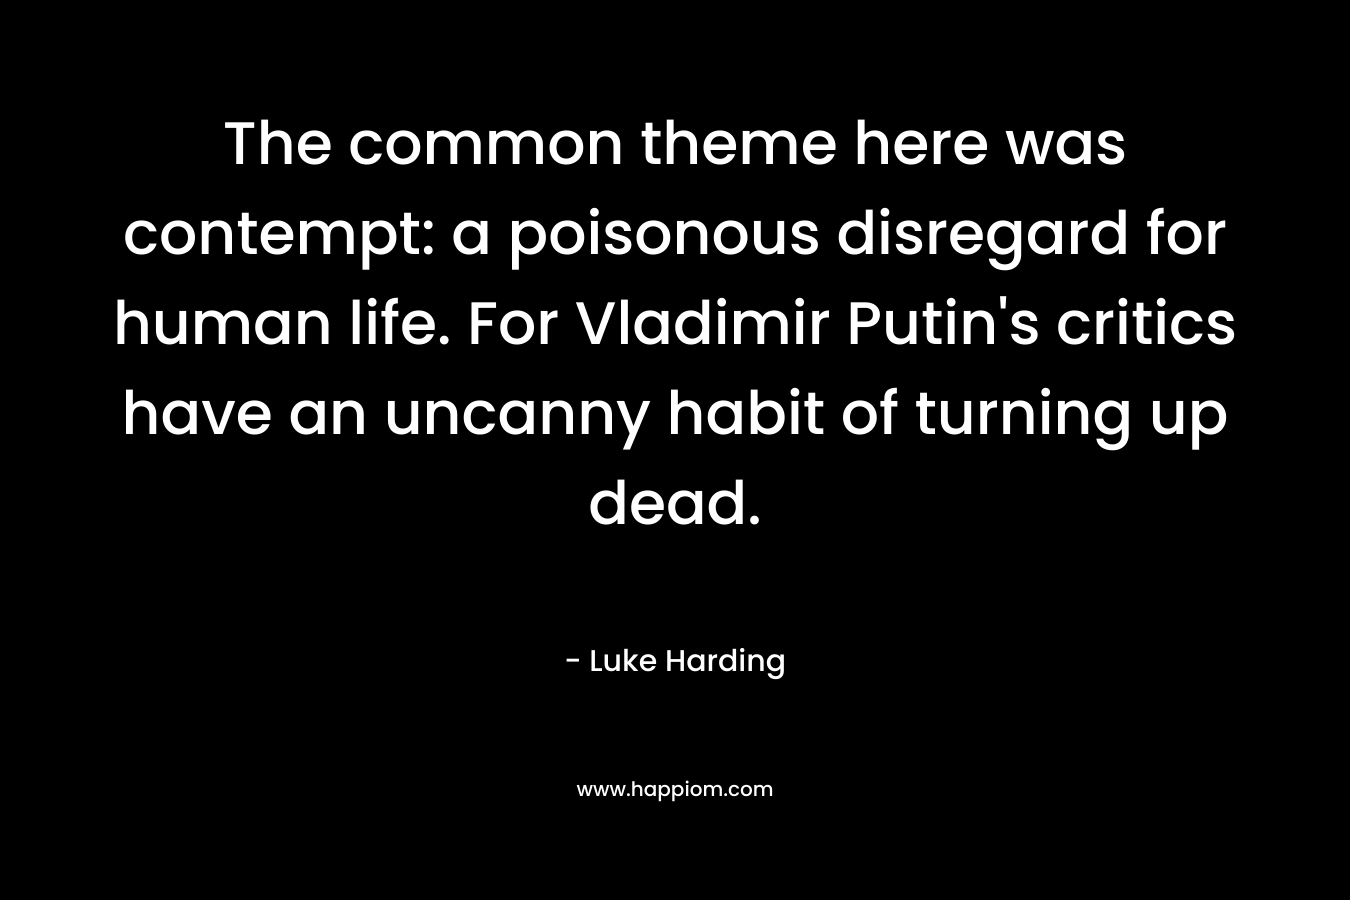 The common theme here was contempt: a poisonous disregard for human life. For Vladimir Putin’s critics have an uncanny habit of turning up dead. – Luke Harding